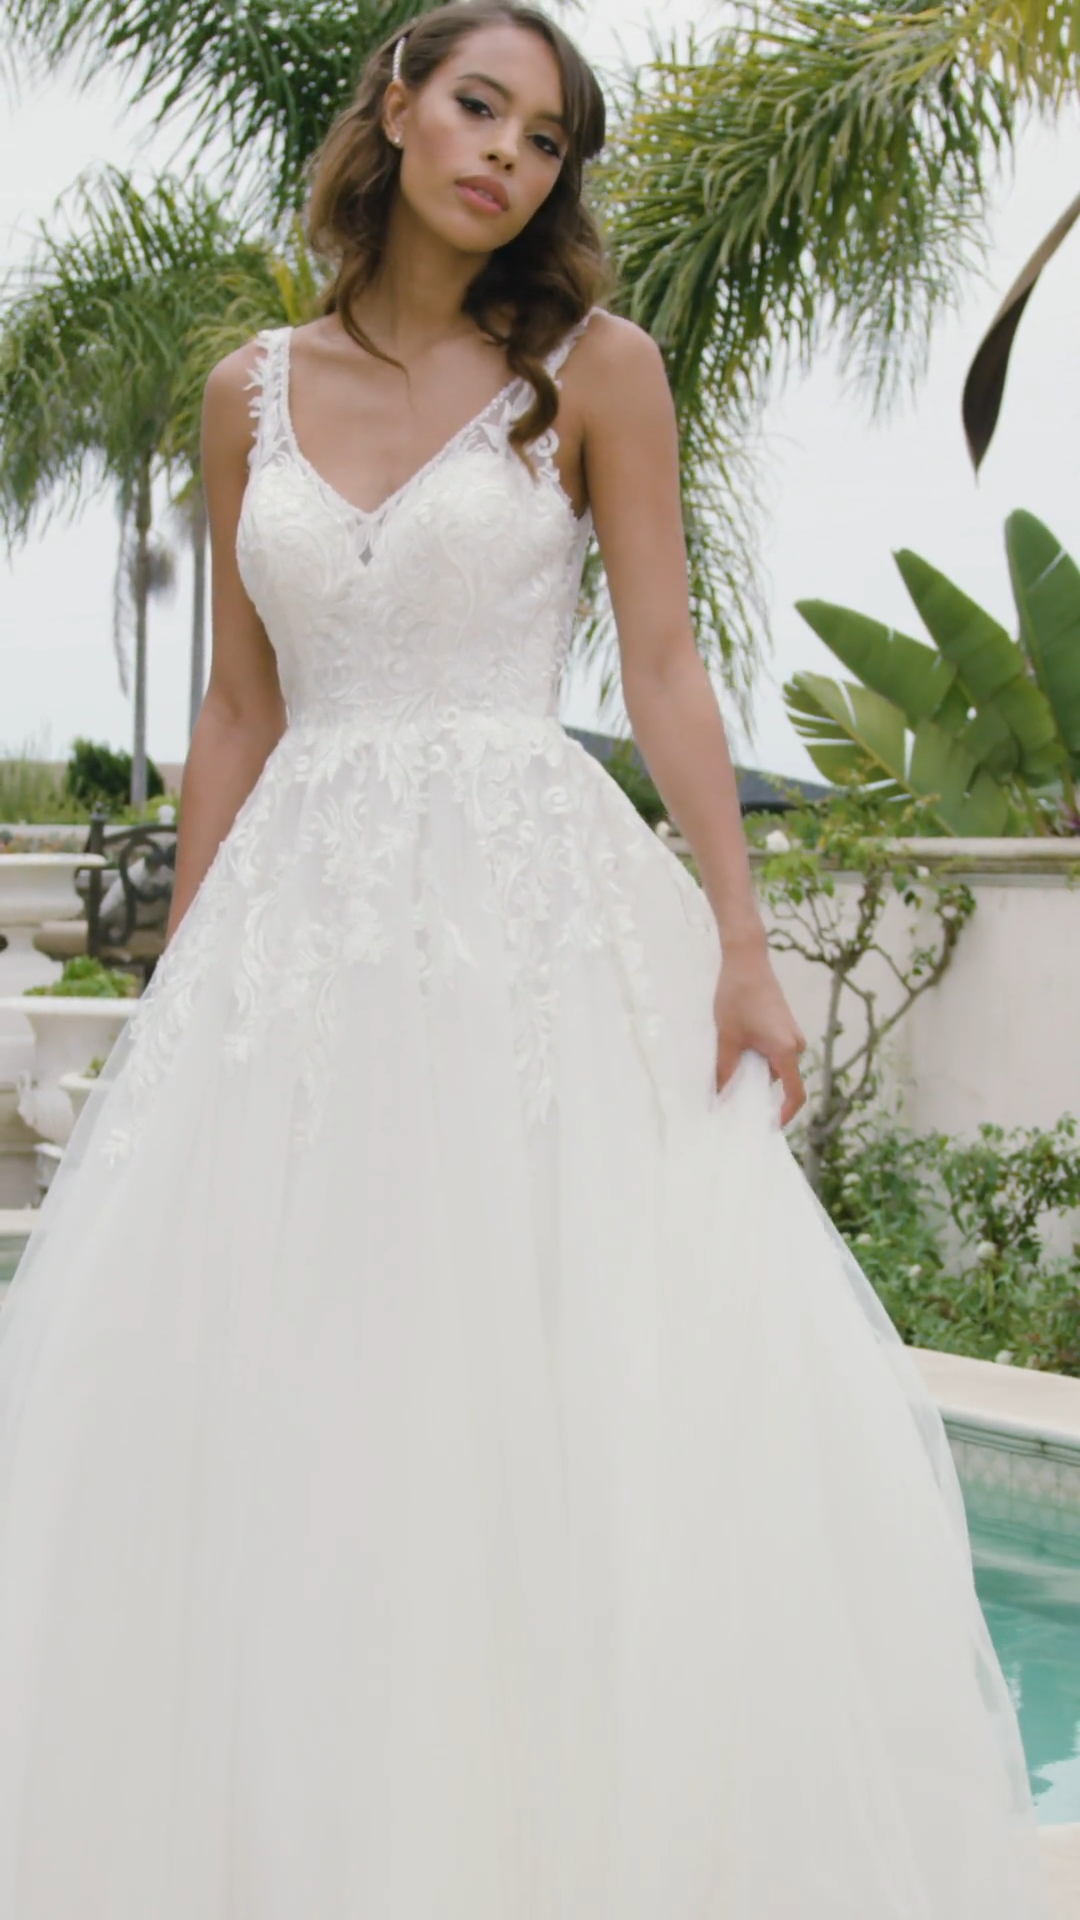 Moonlight Tango T930 V-neck A-line wedding dress with lace bodice and beaded trim necklines and buttons along illusion back